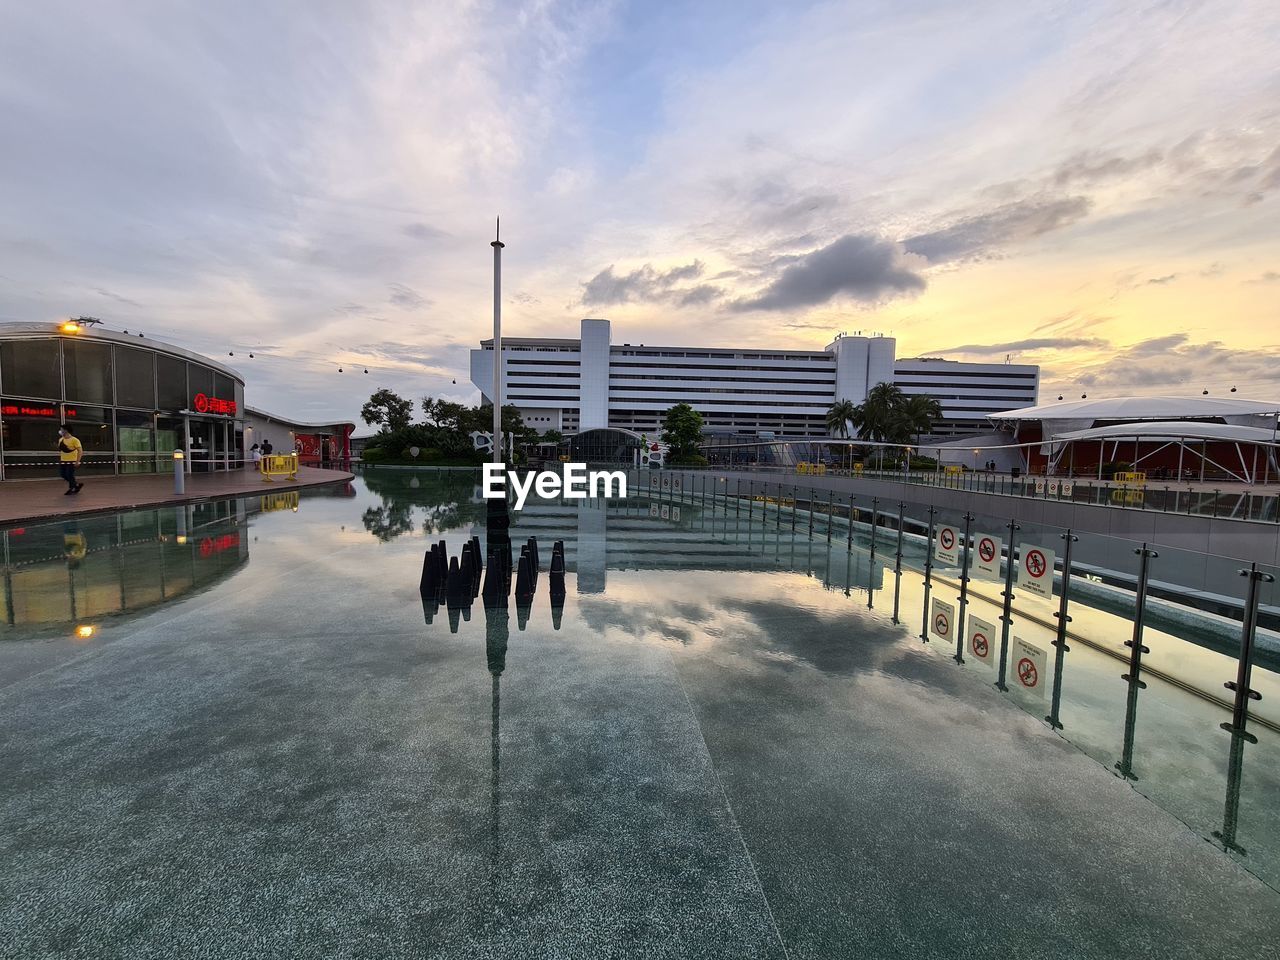 VIEW OF SWIMMING POOL AGAINST BUILDINGS AT SUNSET